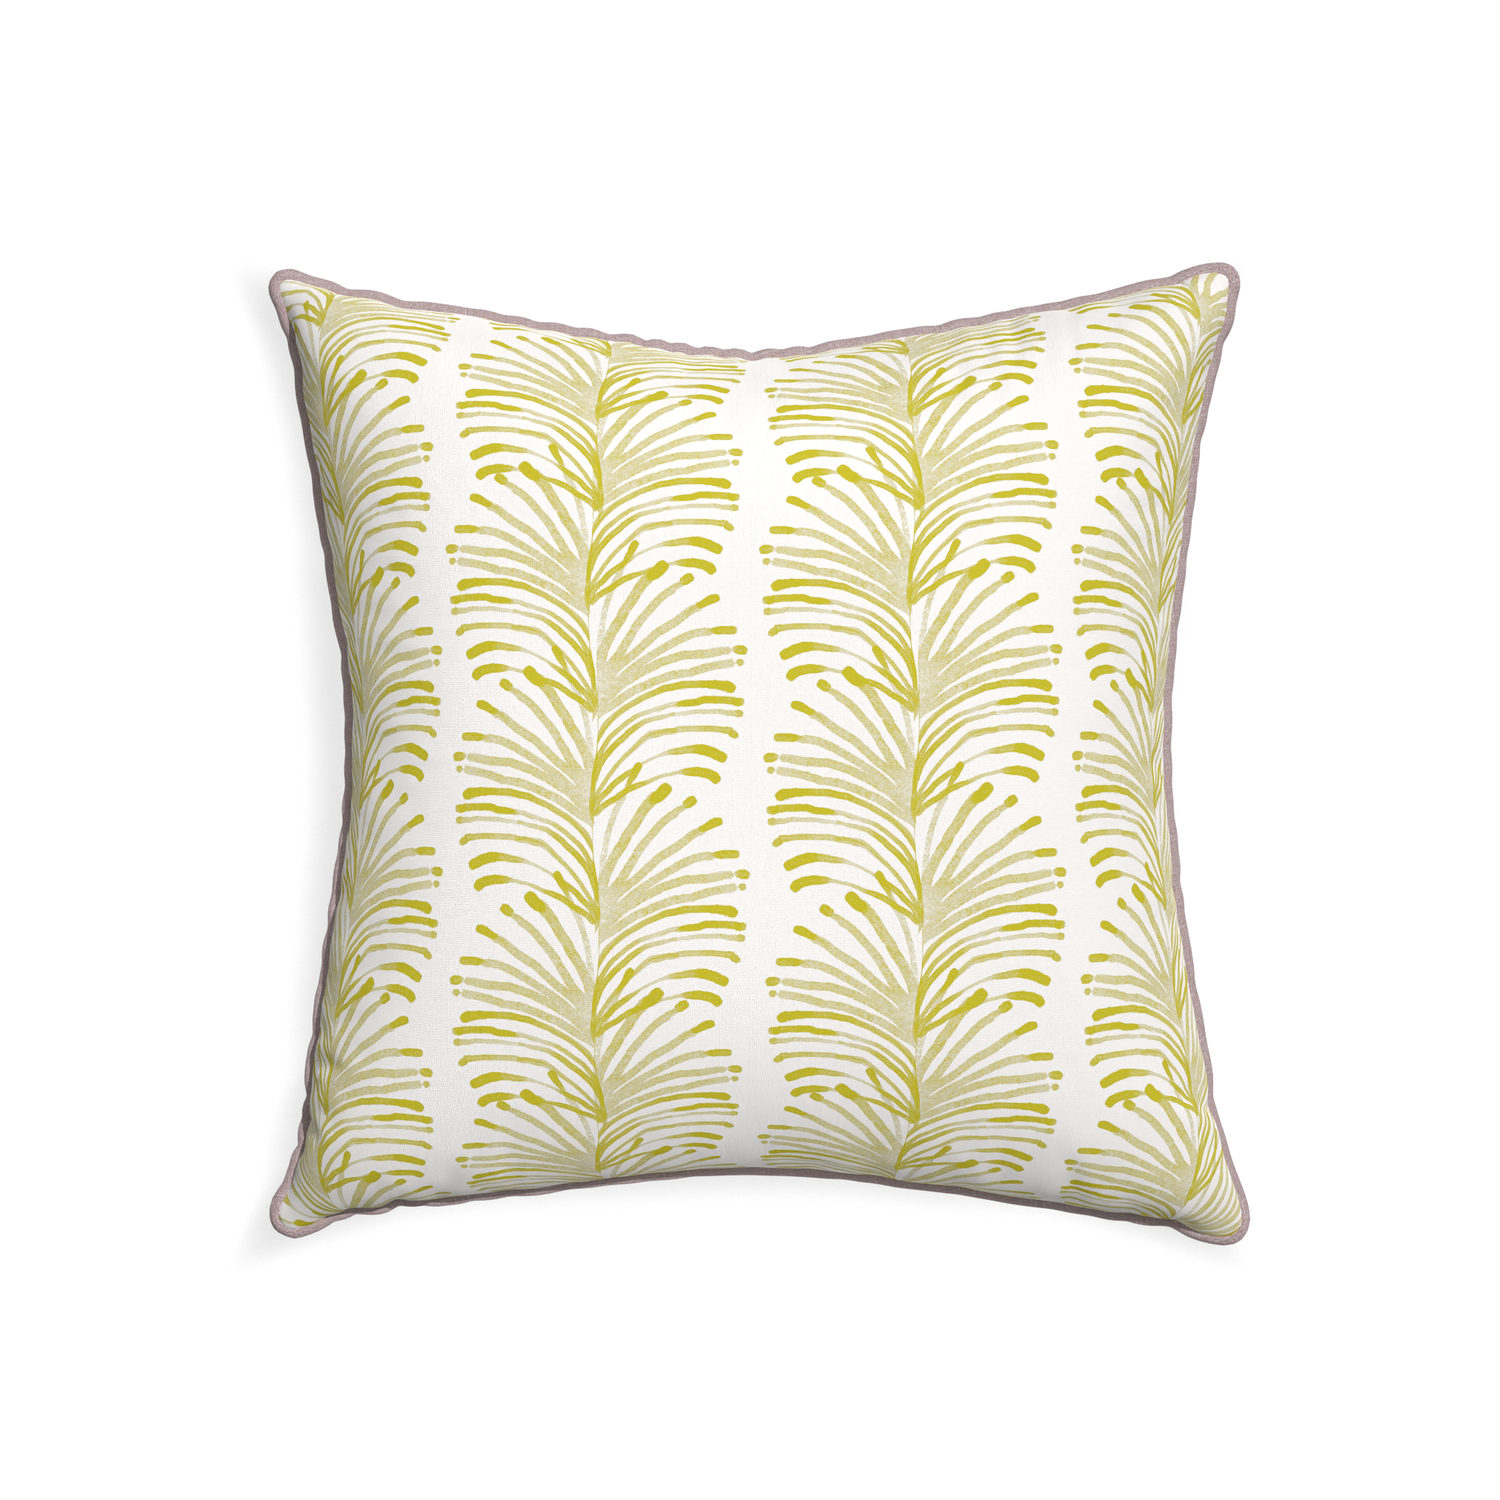 22-square emma chartreuse custom yellow stripe chartreusepillow with orchid piping on white background